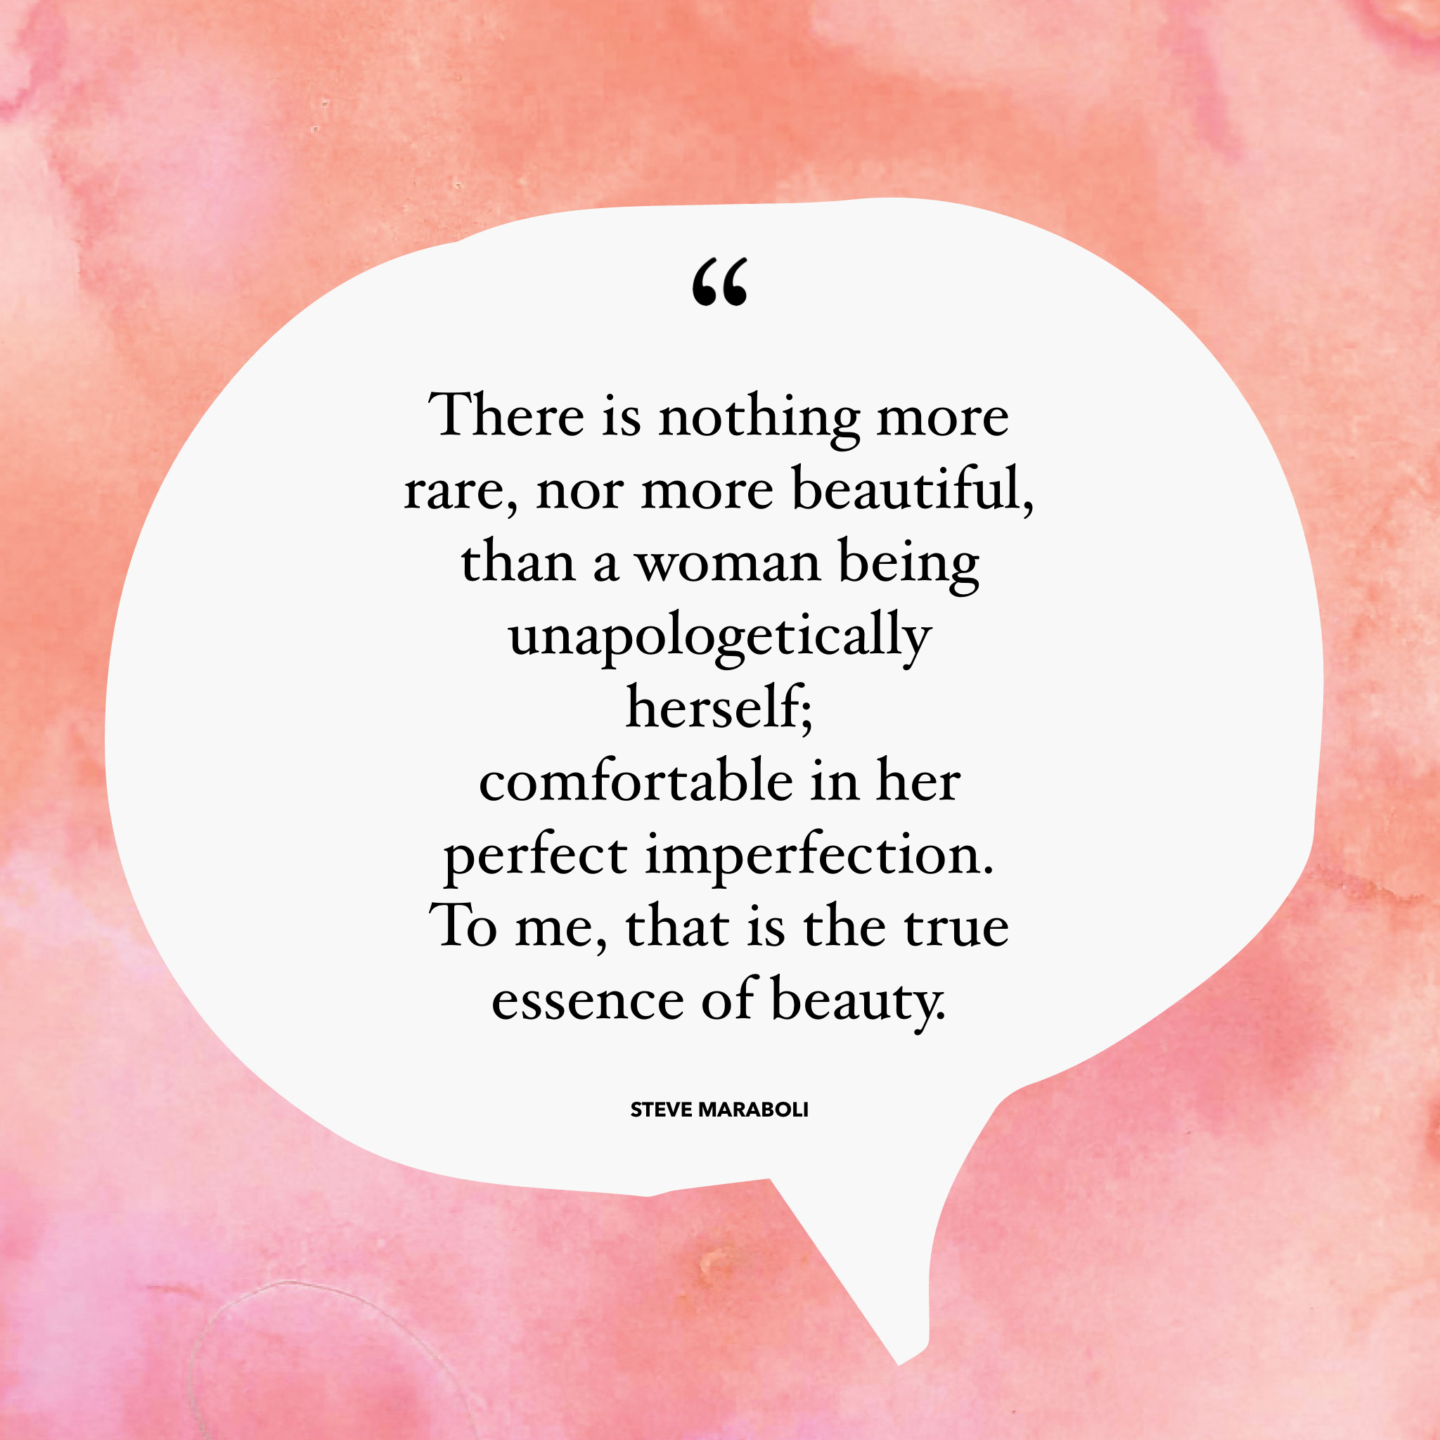 Quote by Steve Maraboli in a white speech bubble with a pink marble effect background. The quote reads "There is nothing more rare, nor more beautiful, than a woman being unapologetically herself; comfortable in her perfect imperfection. To me, that is the true essence of beauty."